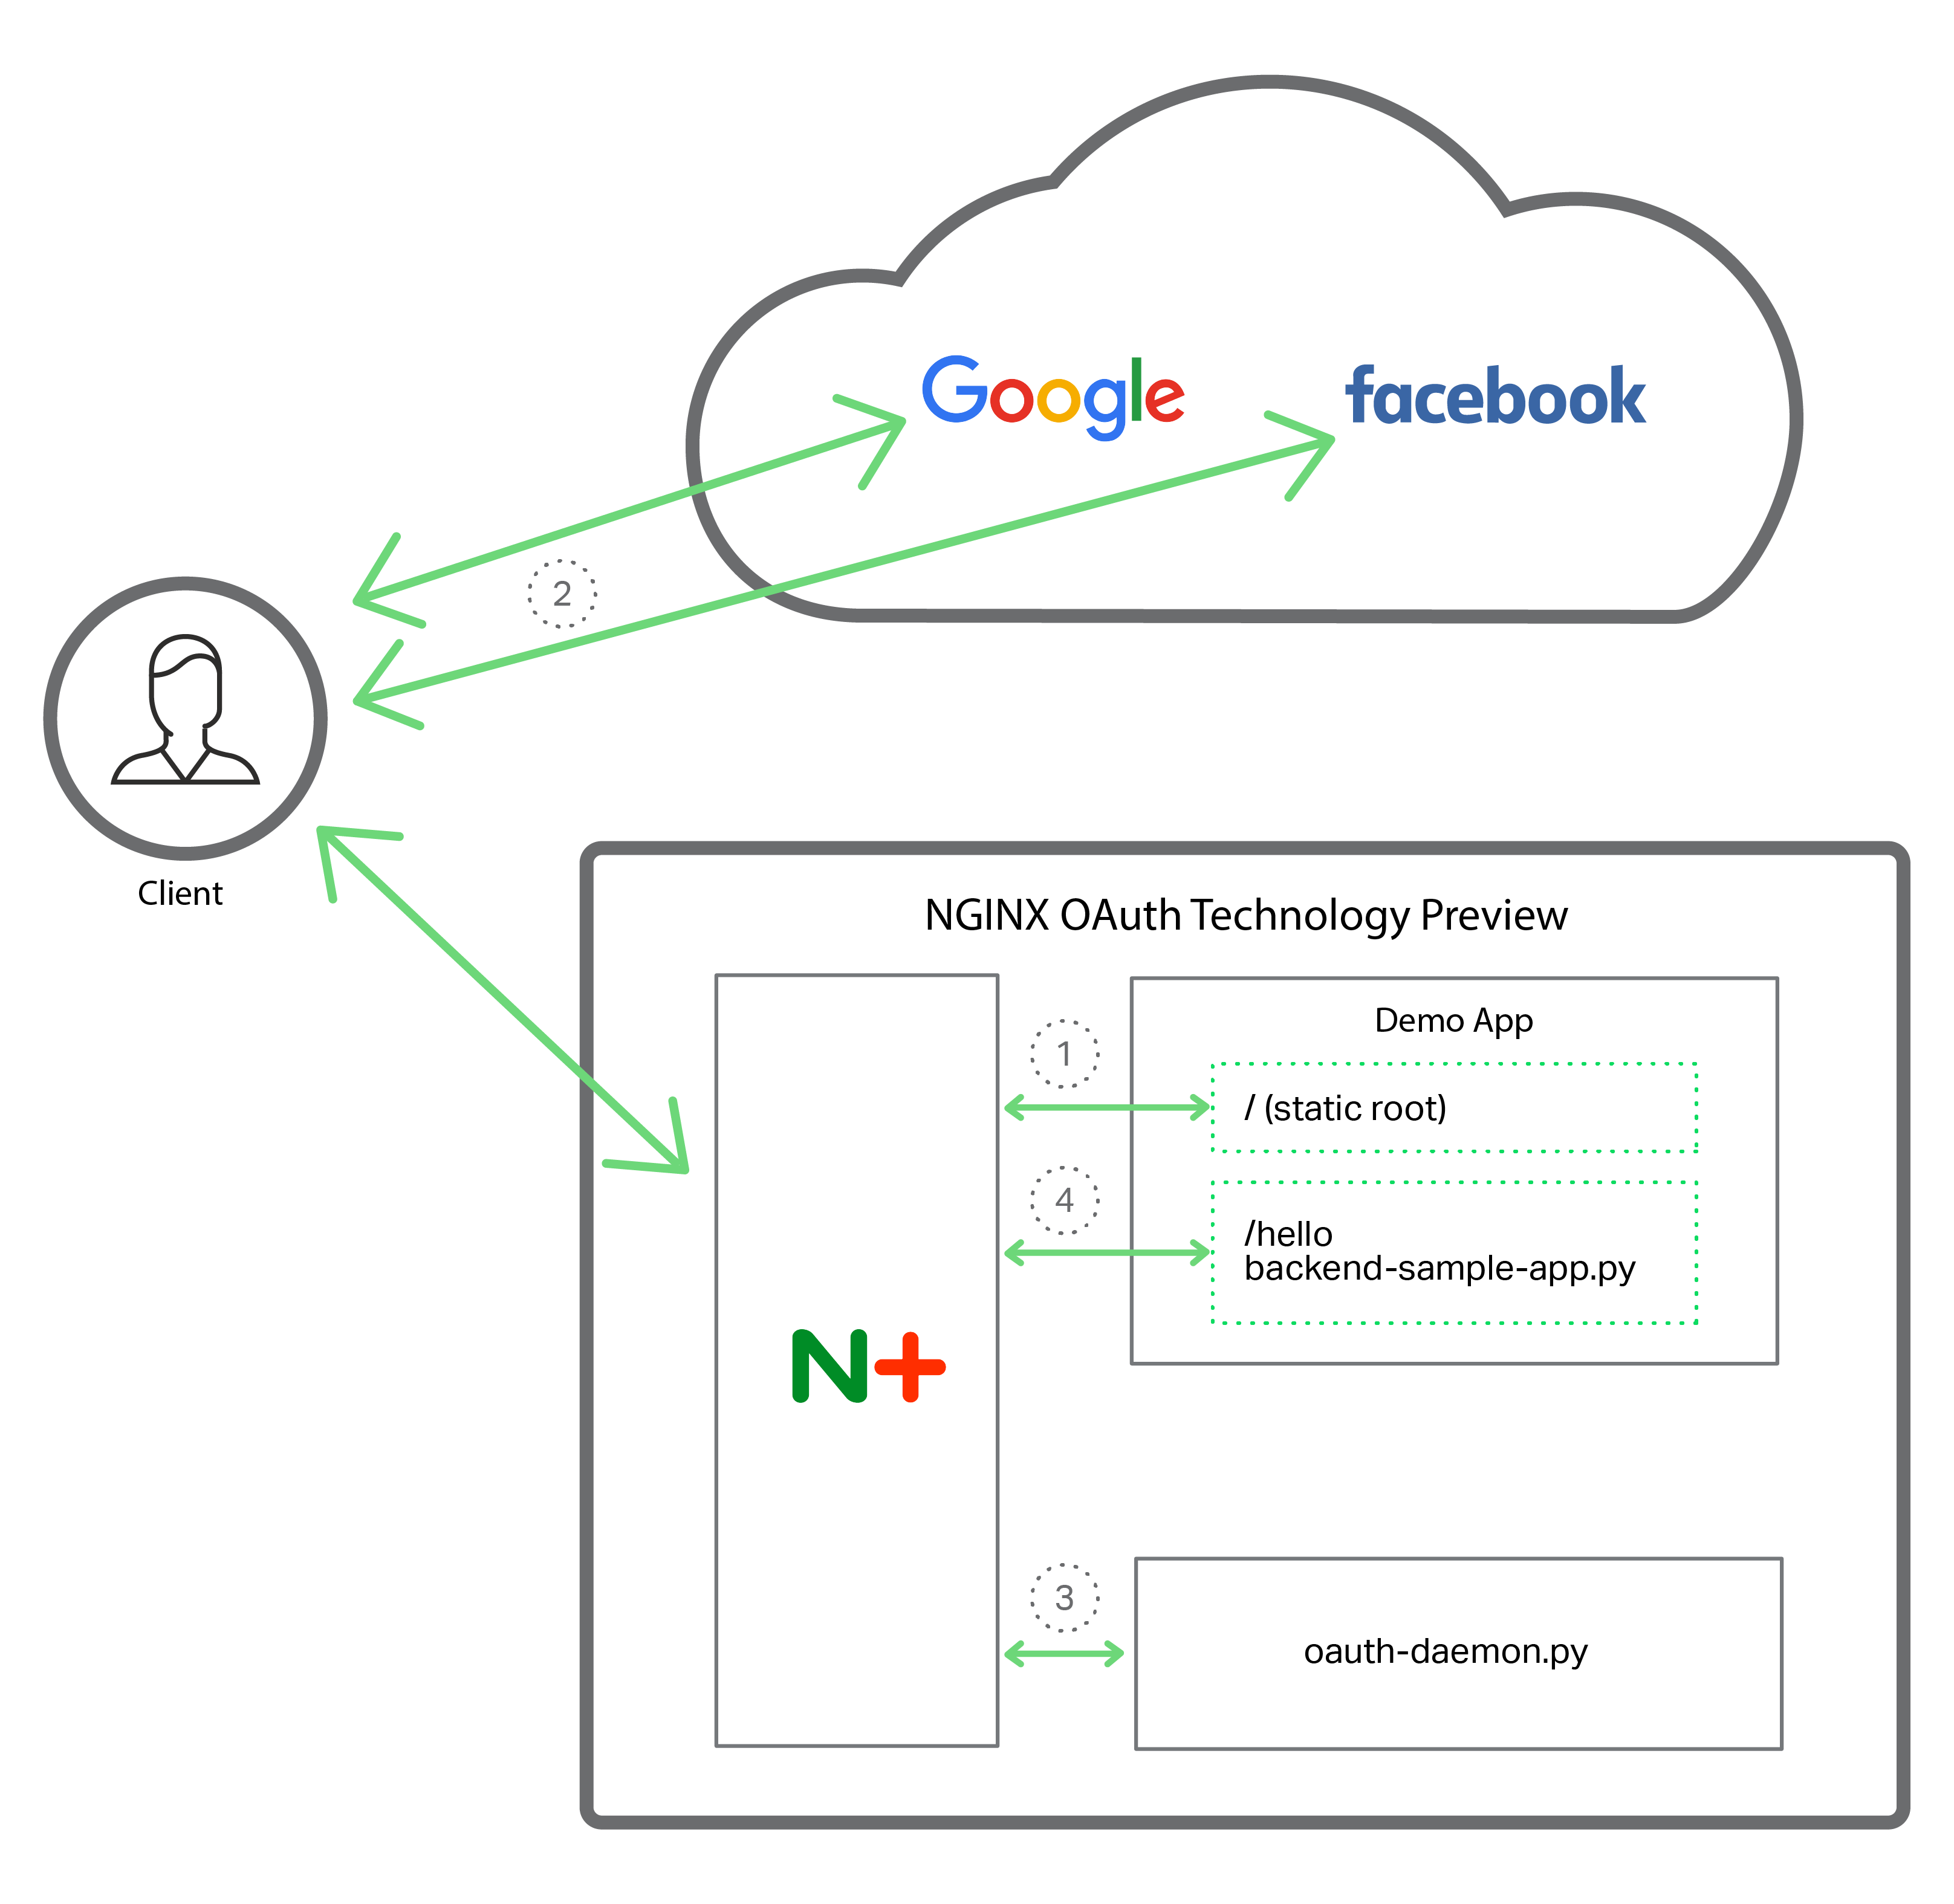 Step-by-step description of how the components in the NGINX Plus OAuth Technology Preview interact